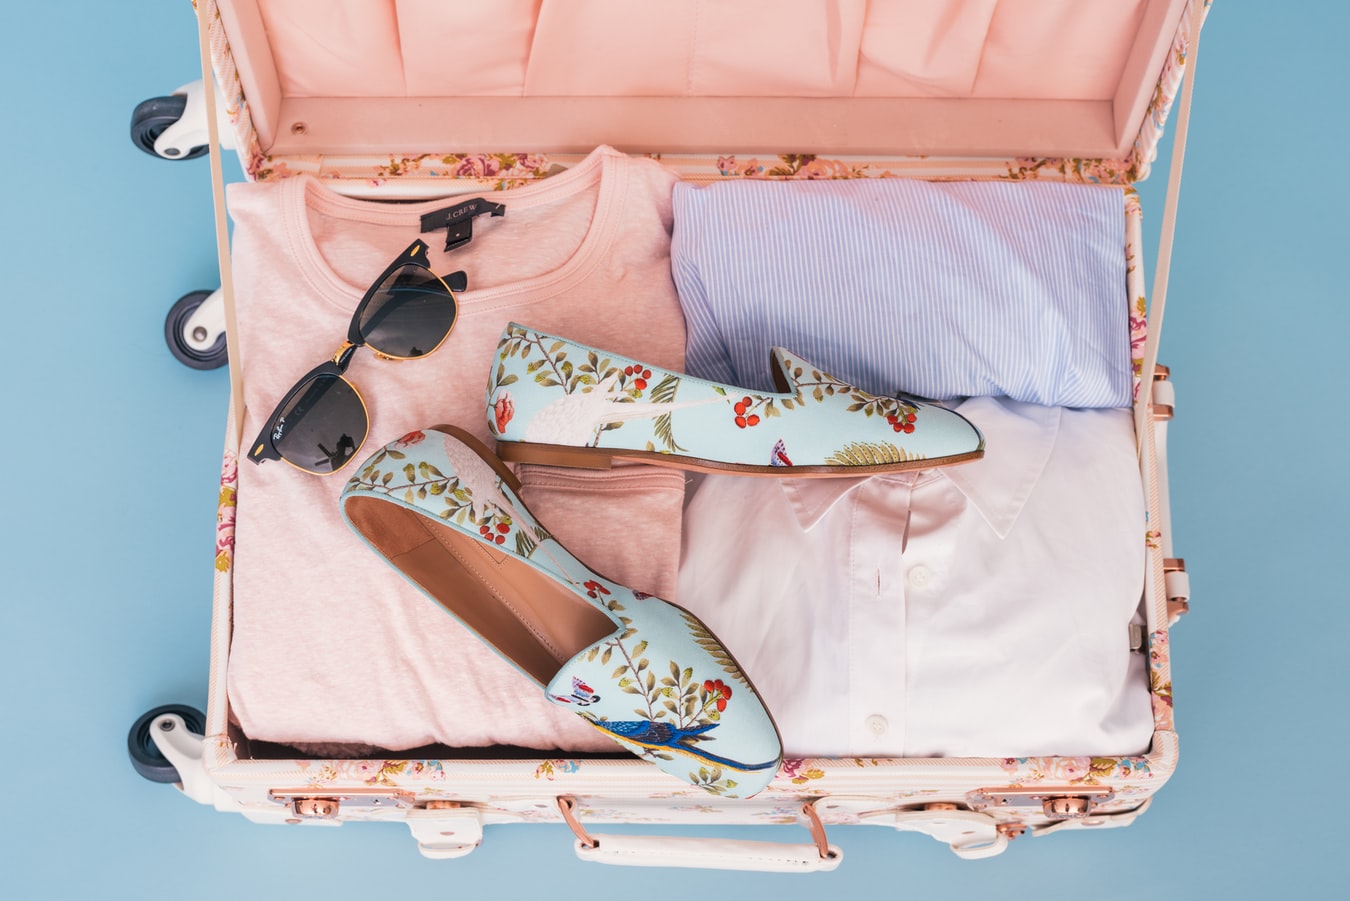 A suitcase packed by a women who is moving into a sober living home